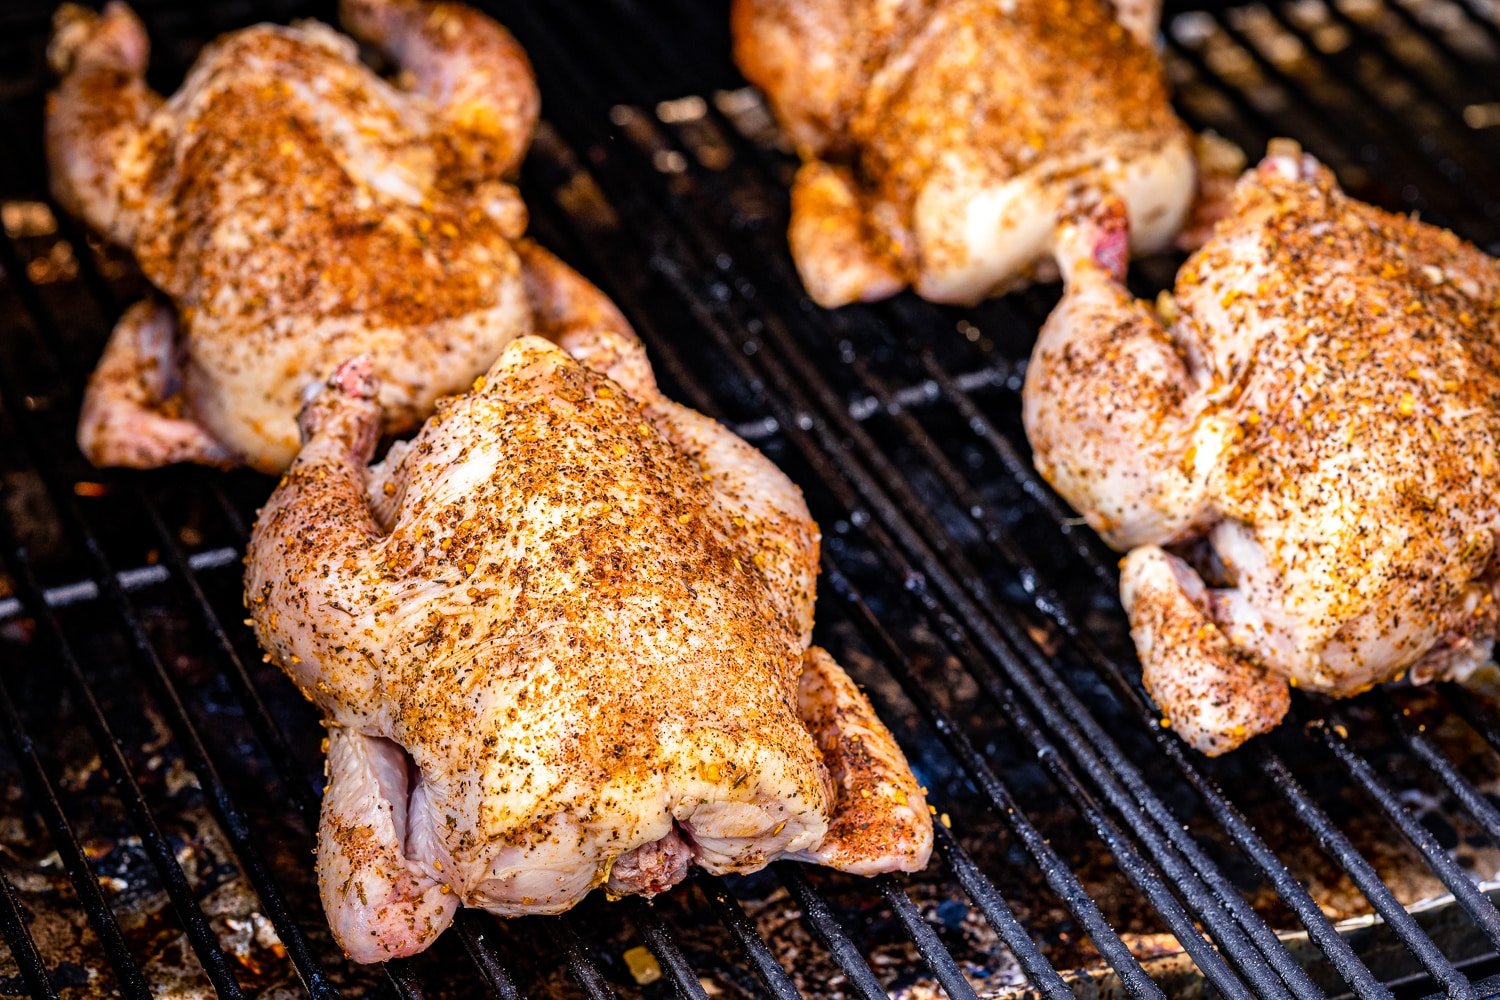 Four seasoned cornish game hens on the grill grates of a smoker.